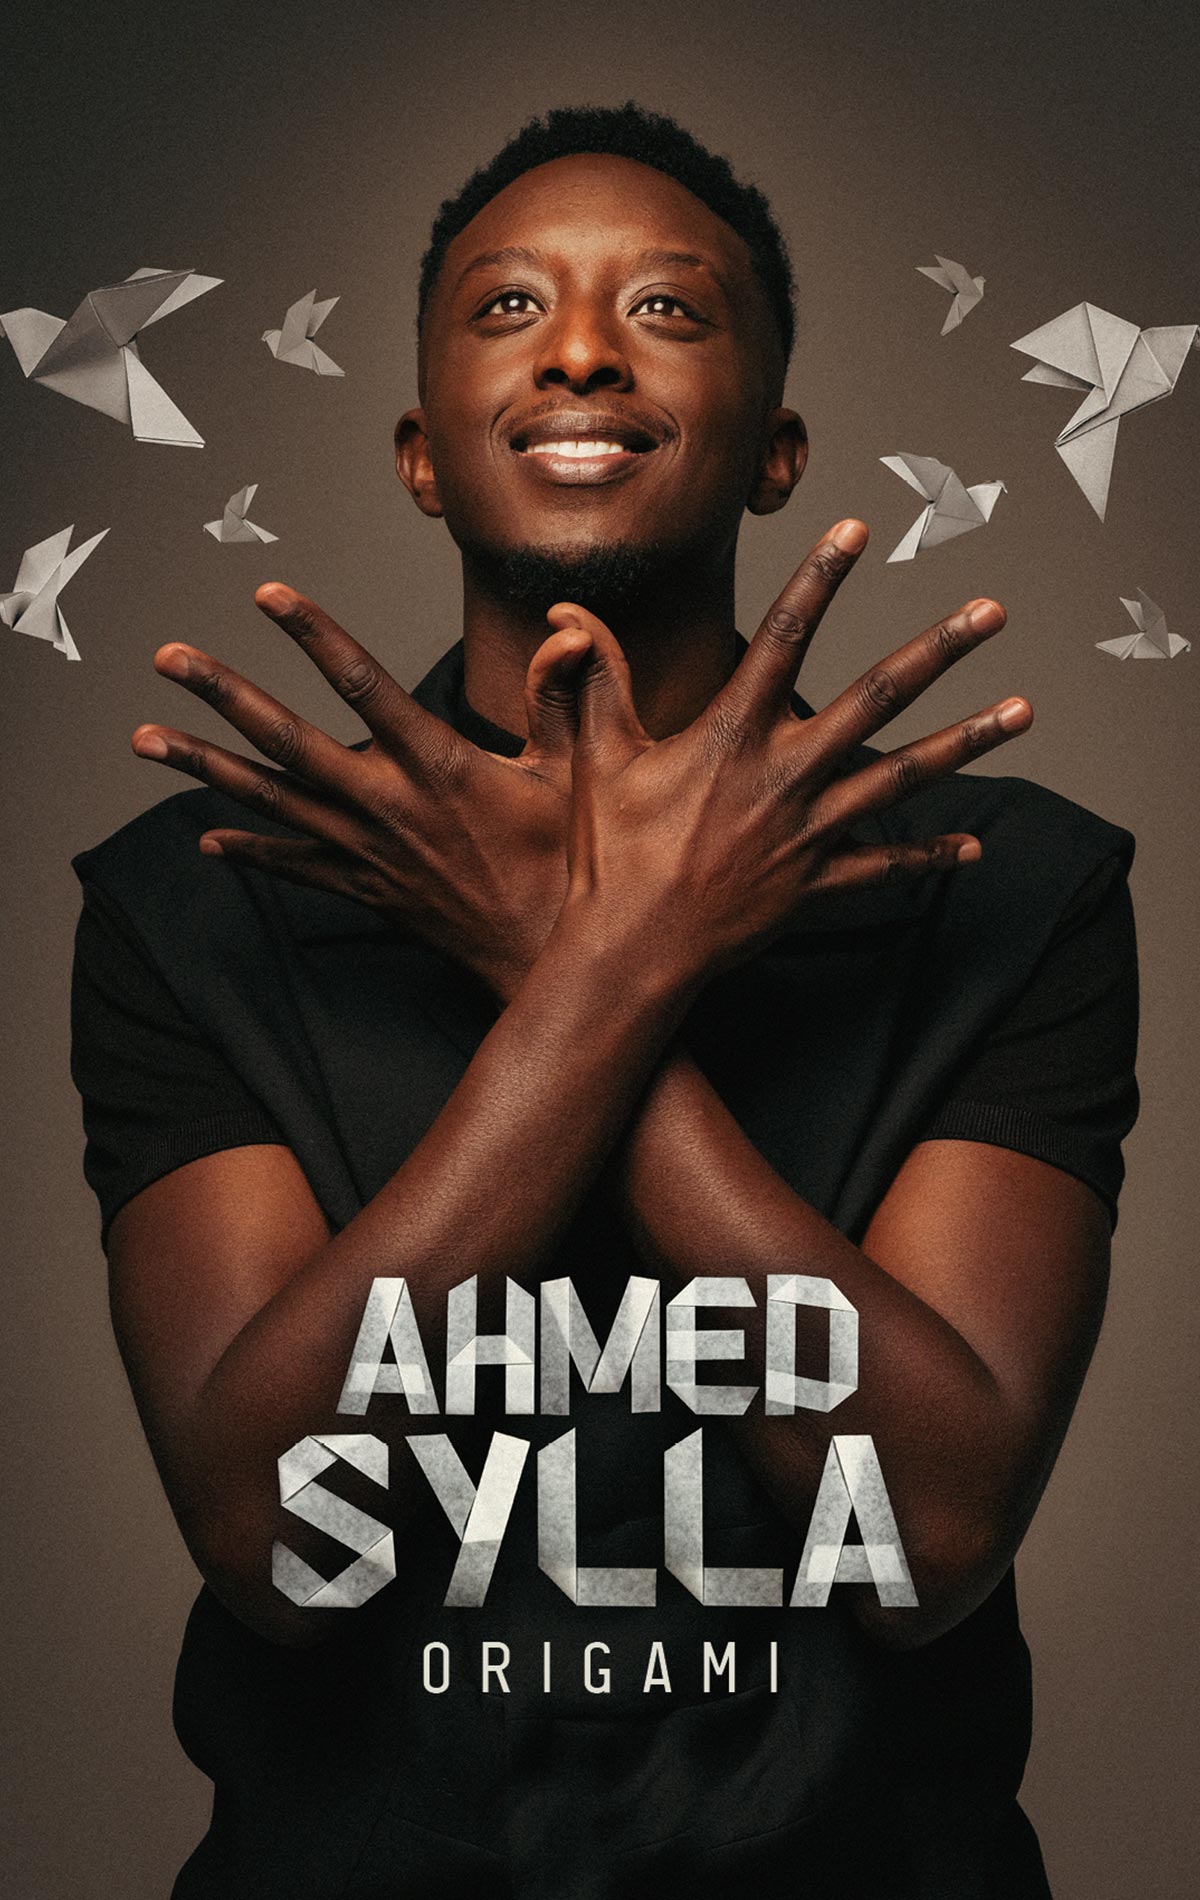 Ahmed Sylla at Zenith Orleans Tickets